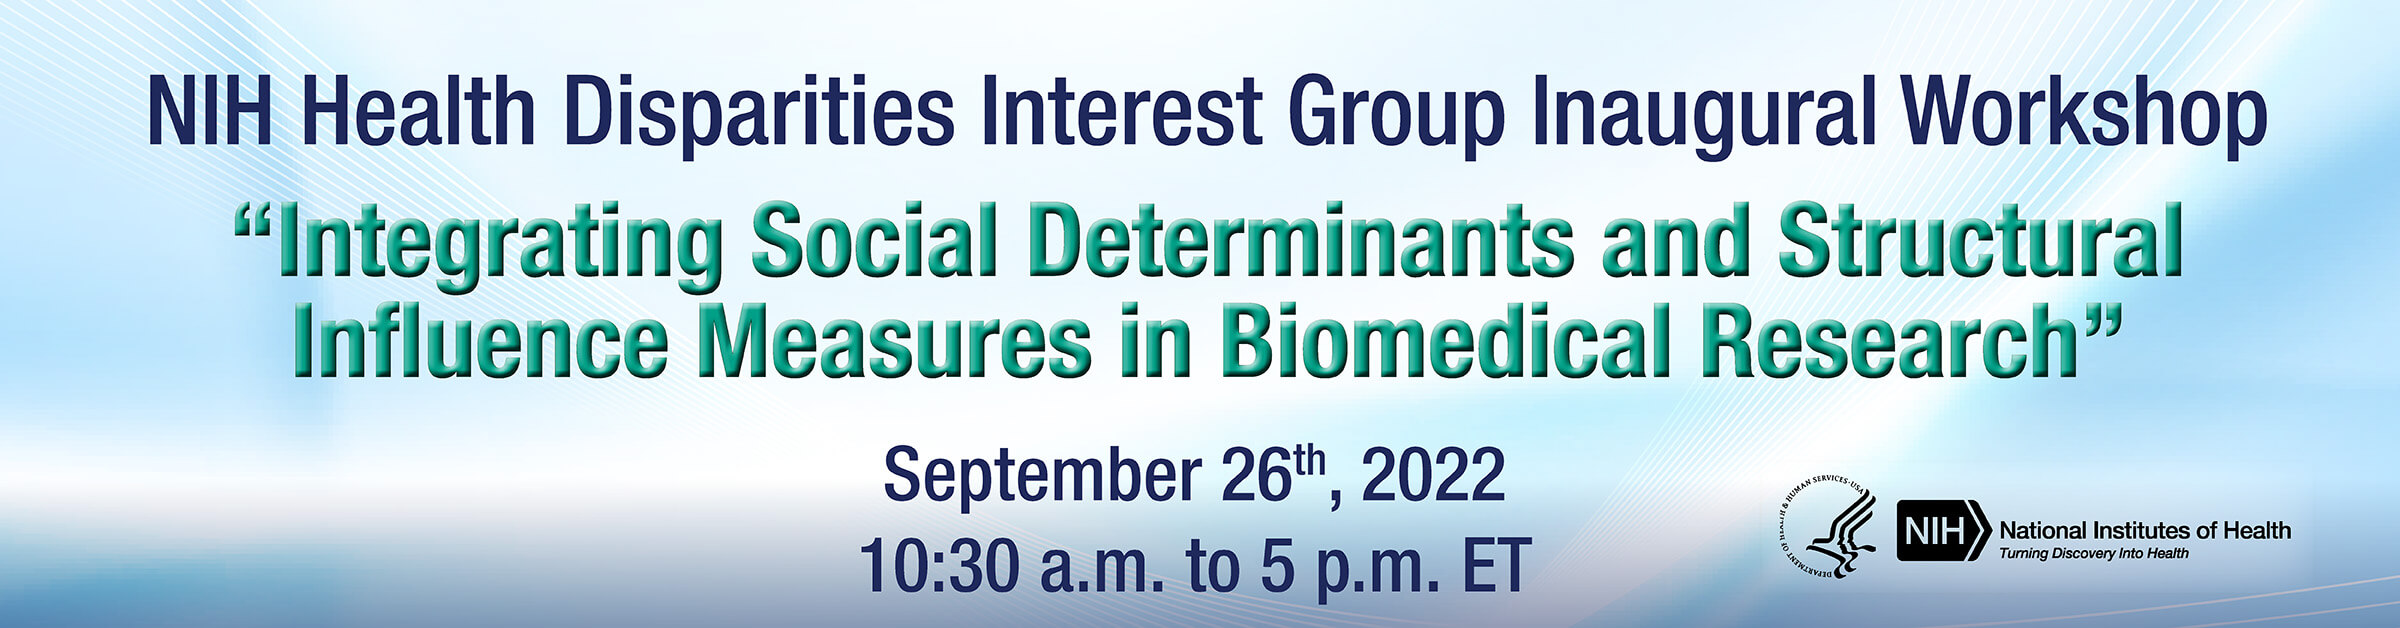 NIH Health Disparities Interest Group Inaugural Workshop: Integrating Social Determinants and Structural Influence Measures in Biomedical Research